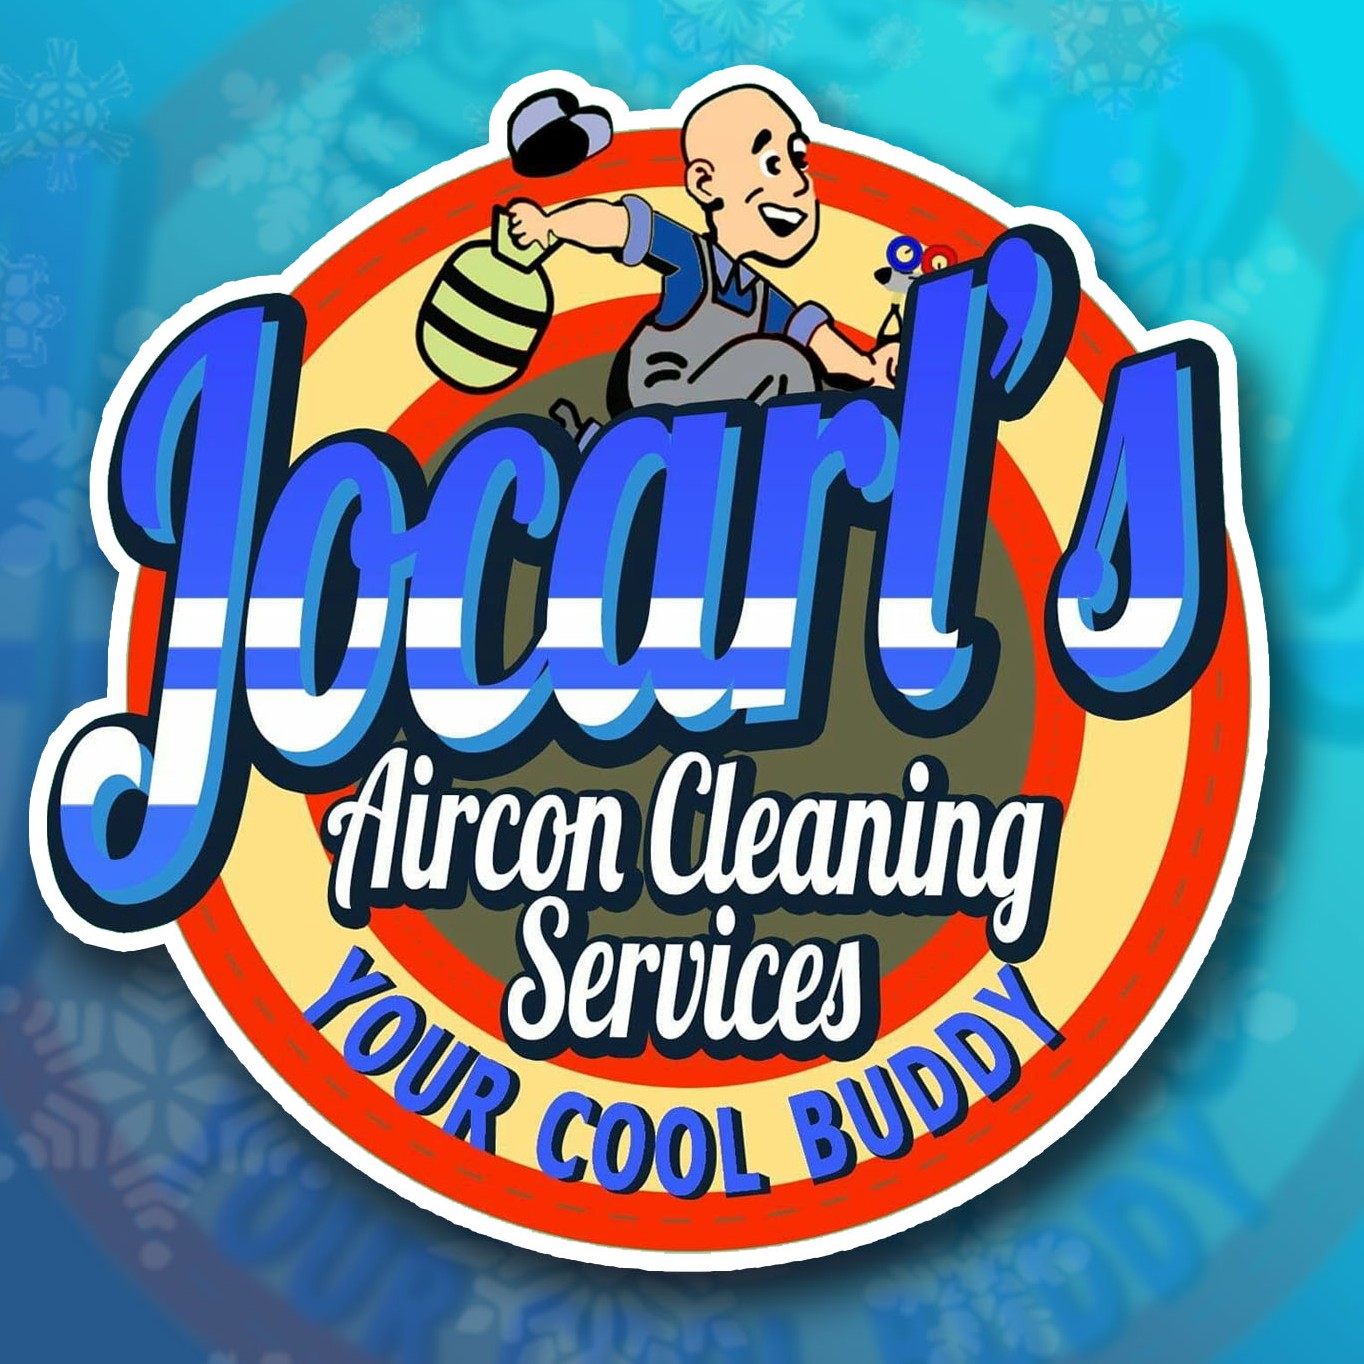 JOCARLS AIRCON CLEANING SERVICES LOGO